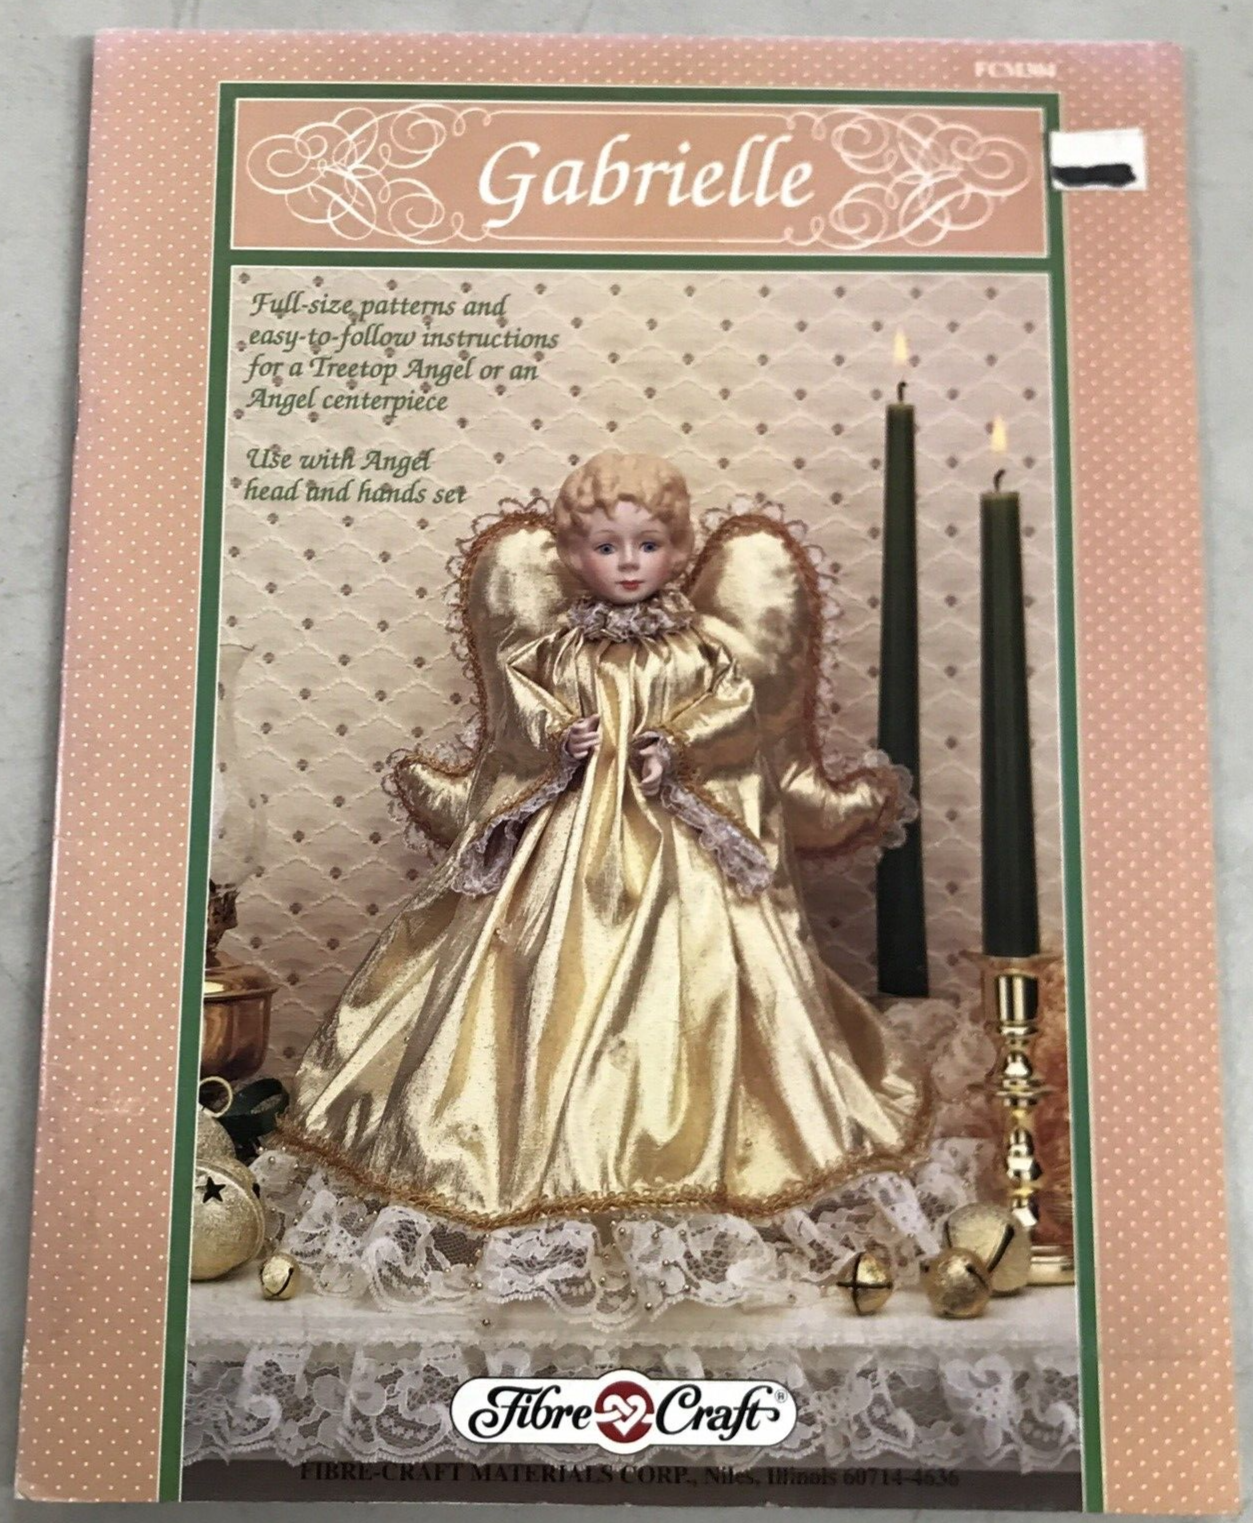 Gabrielle Treetop Angel Centerpiece [Pamphlet] Mary Ann Godfrey Sewing Pattern - $6.21